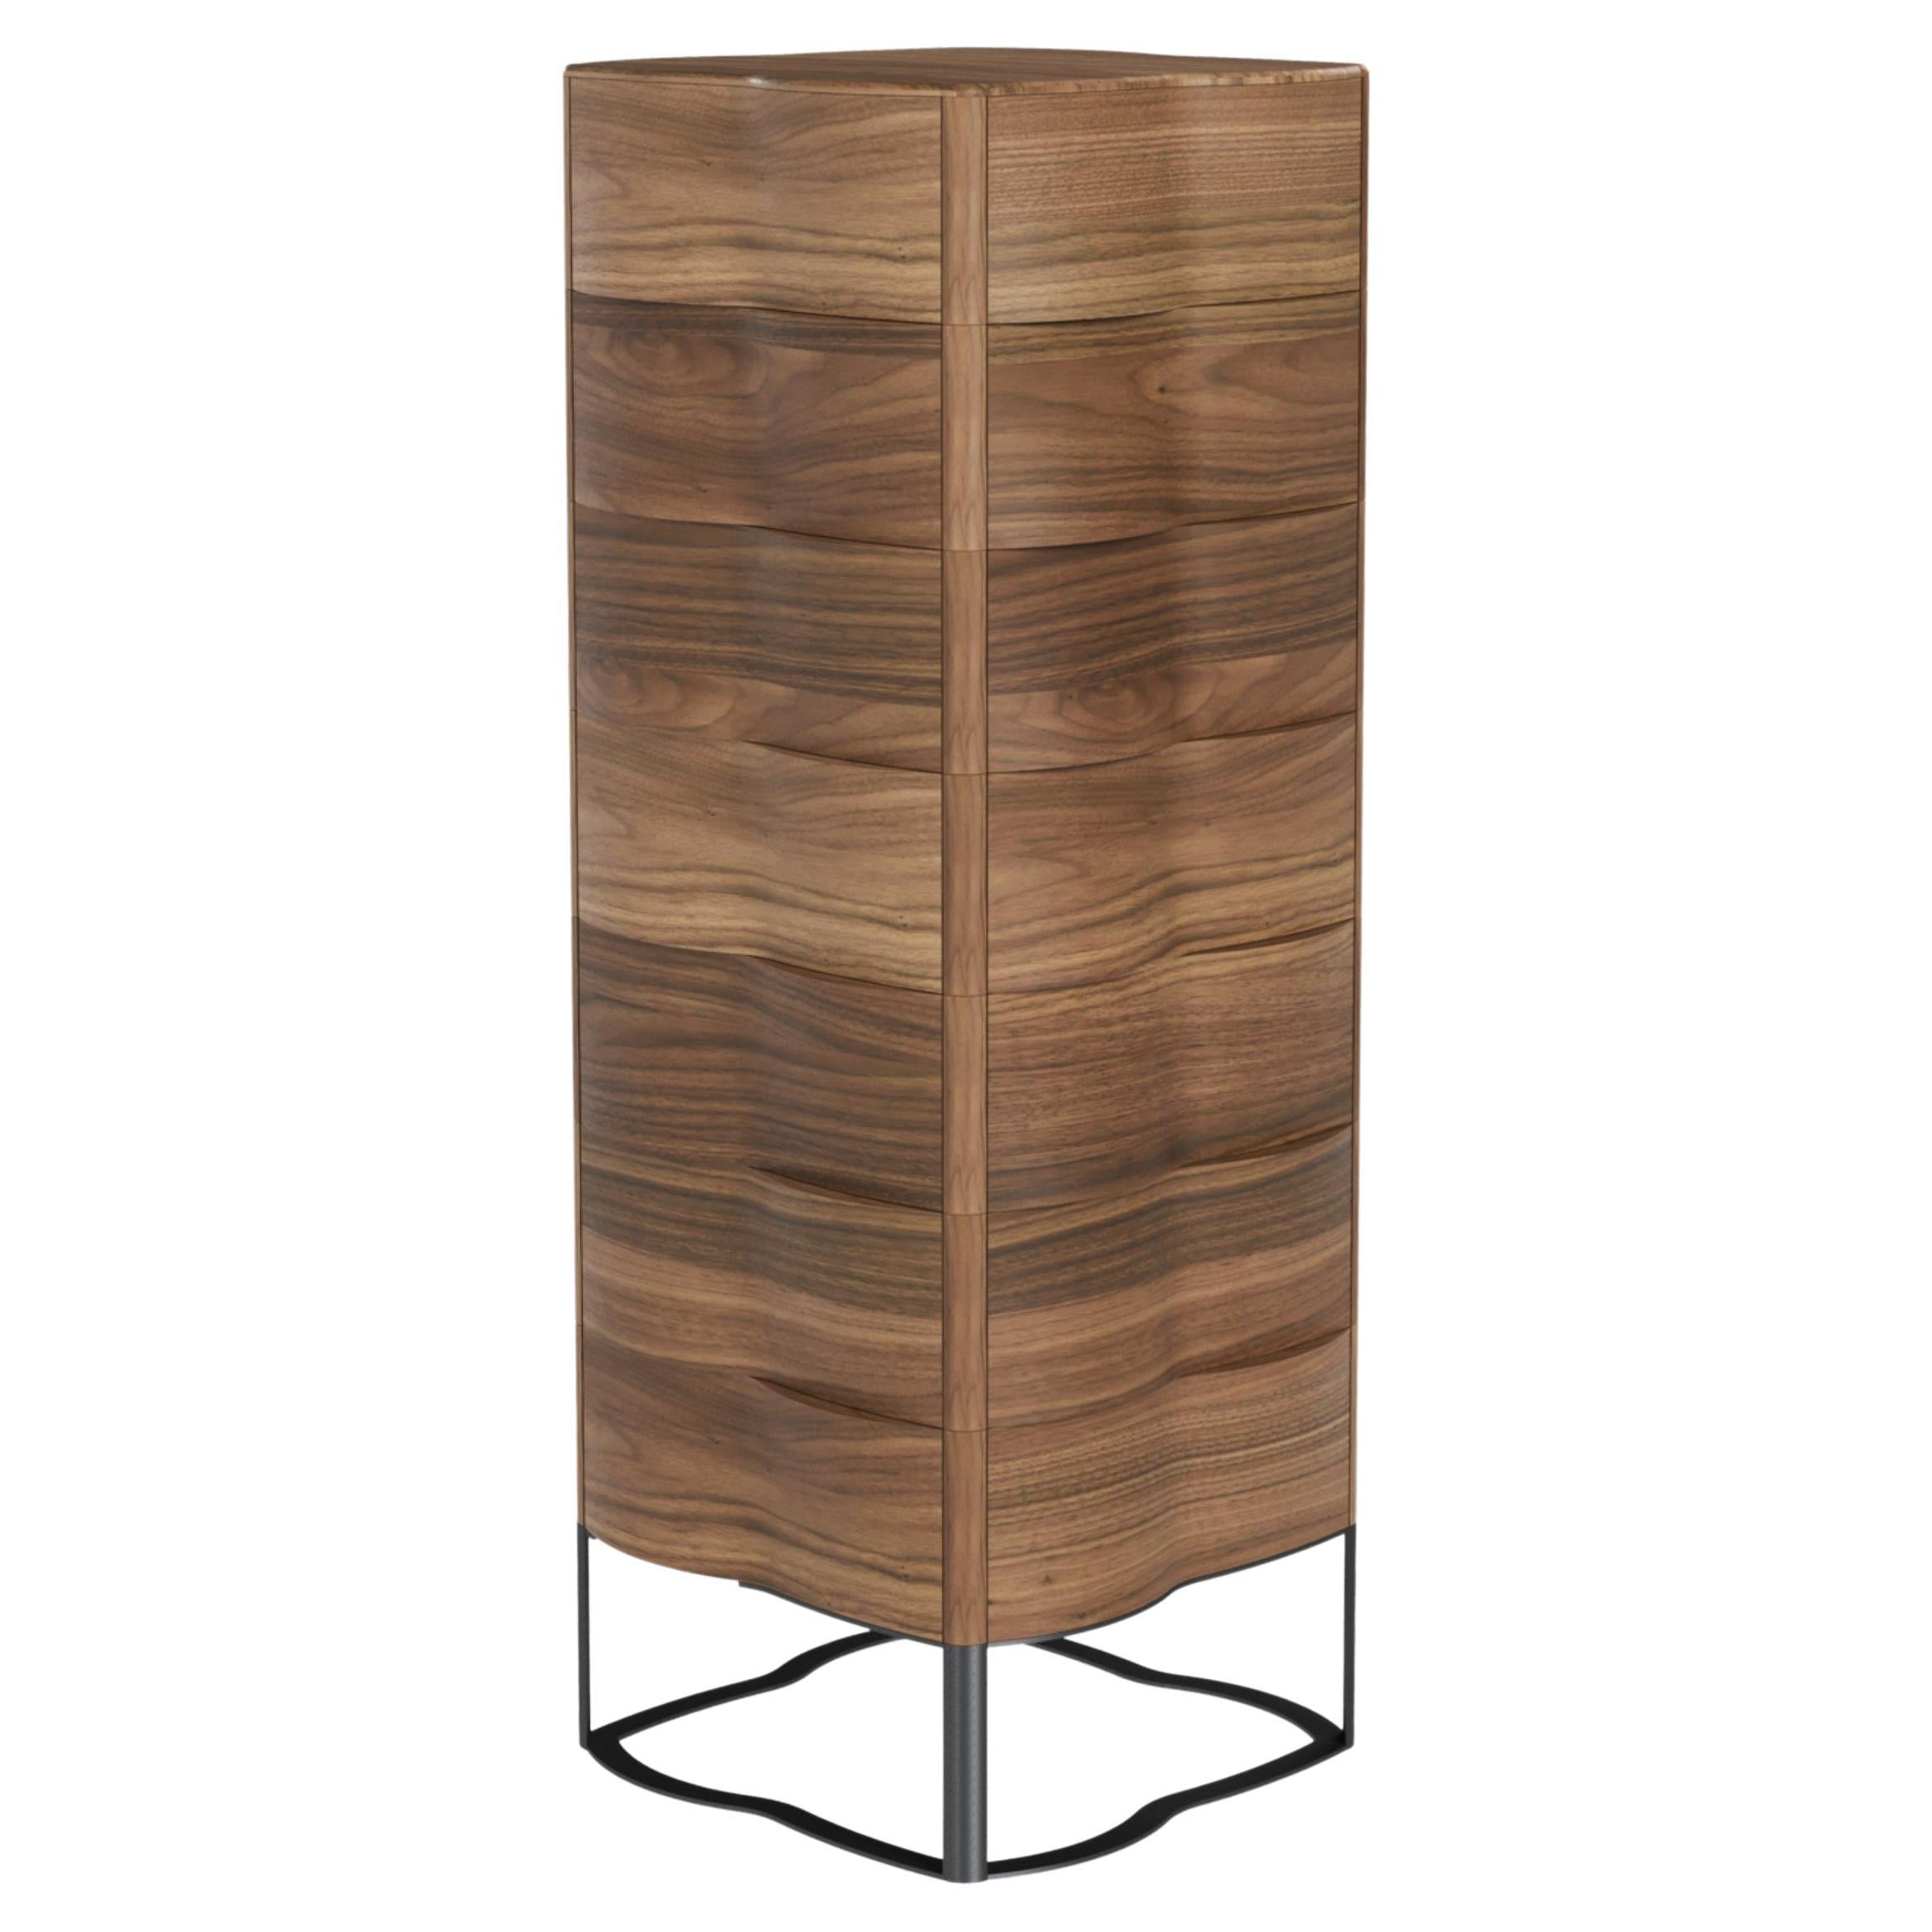 Walnut Wood Chest of Drawers Tall Sculptural Design